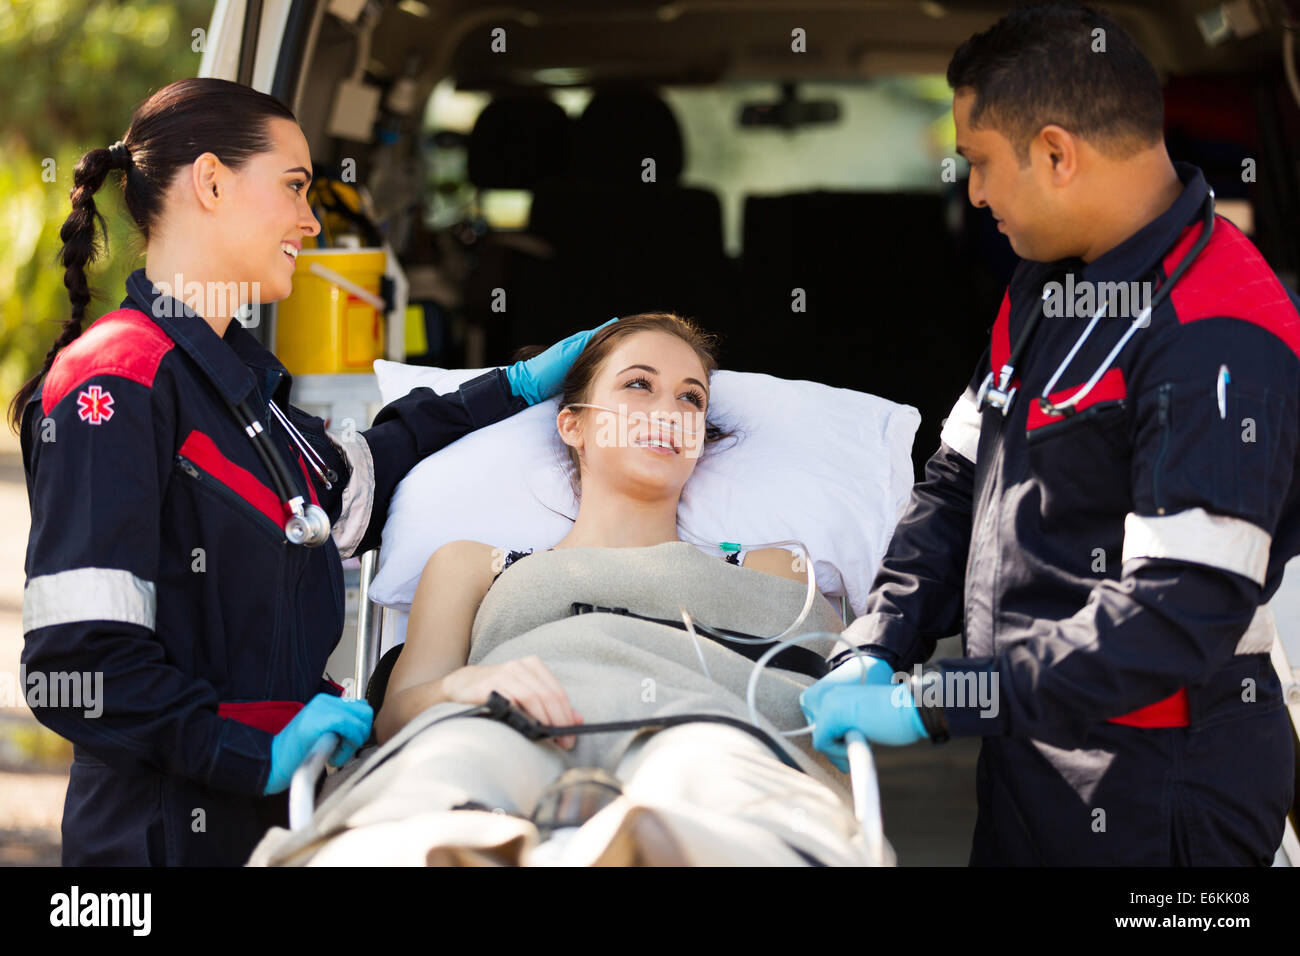 friendly paramedic comforting young patient before transporting her to hospital Stock Photo